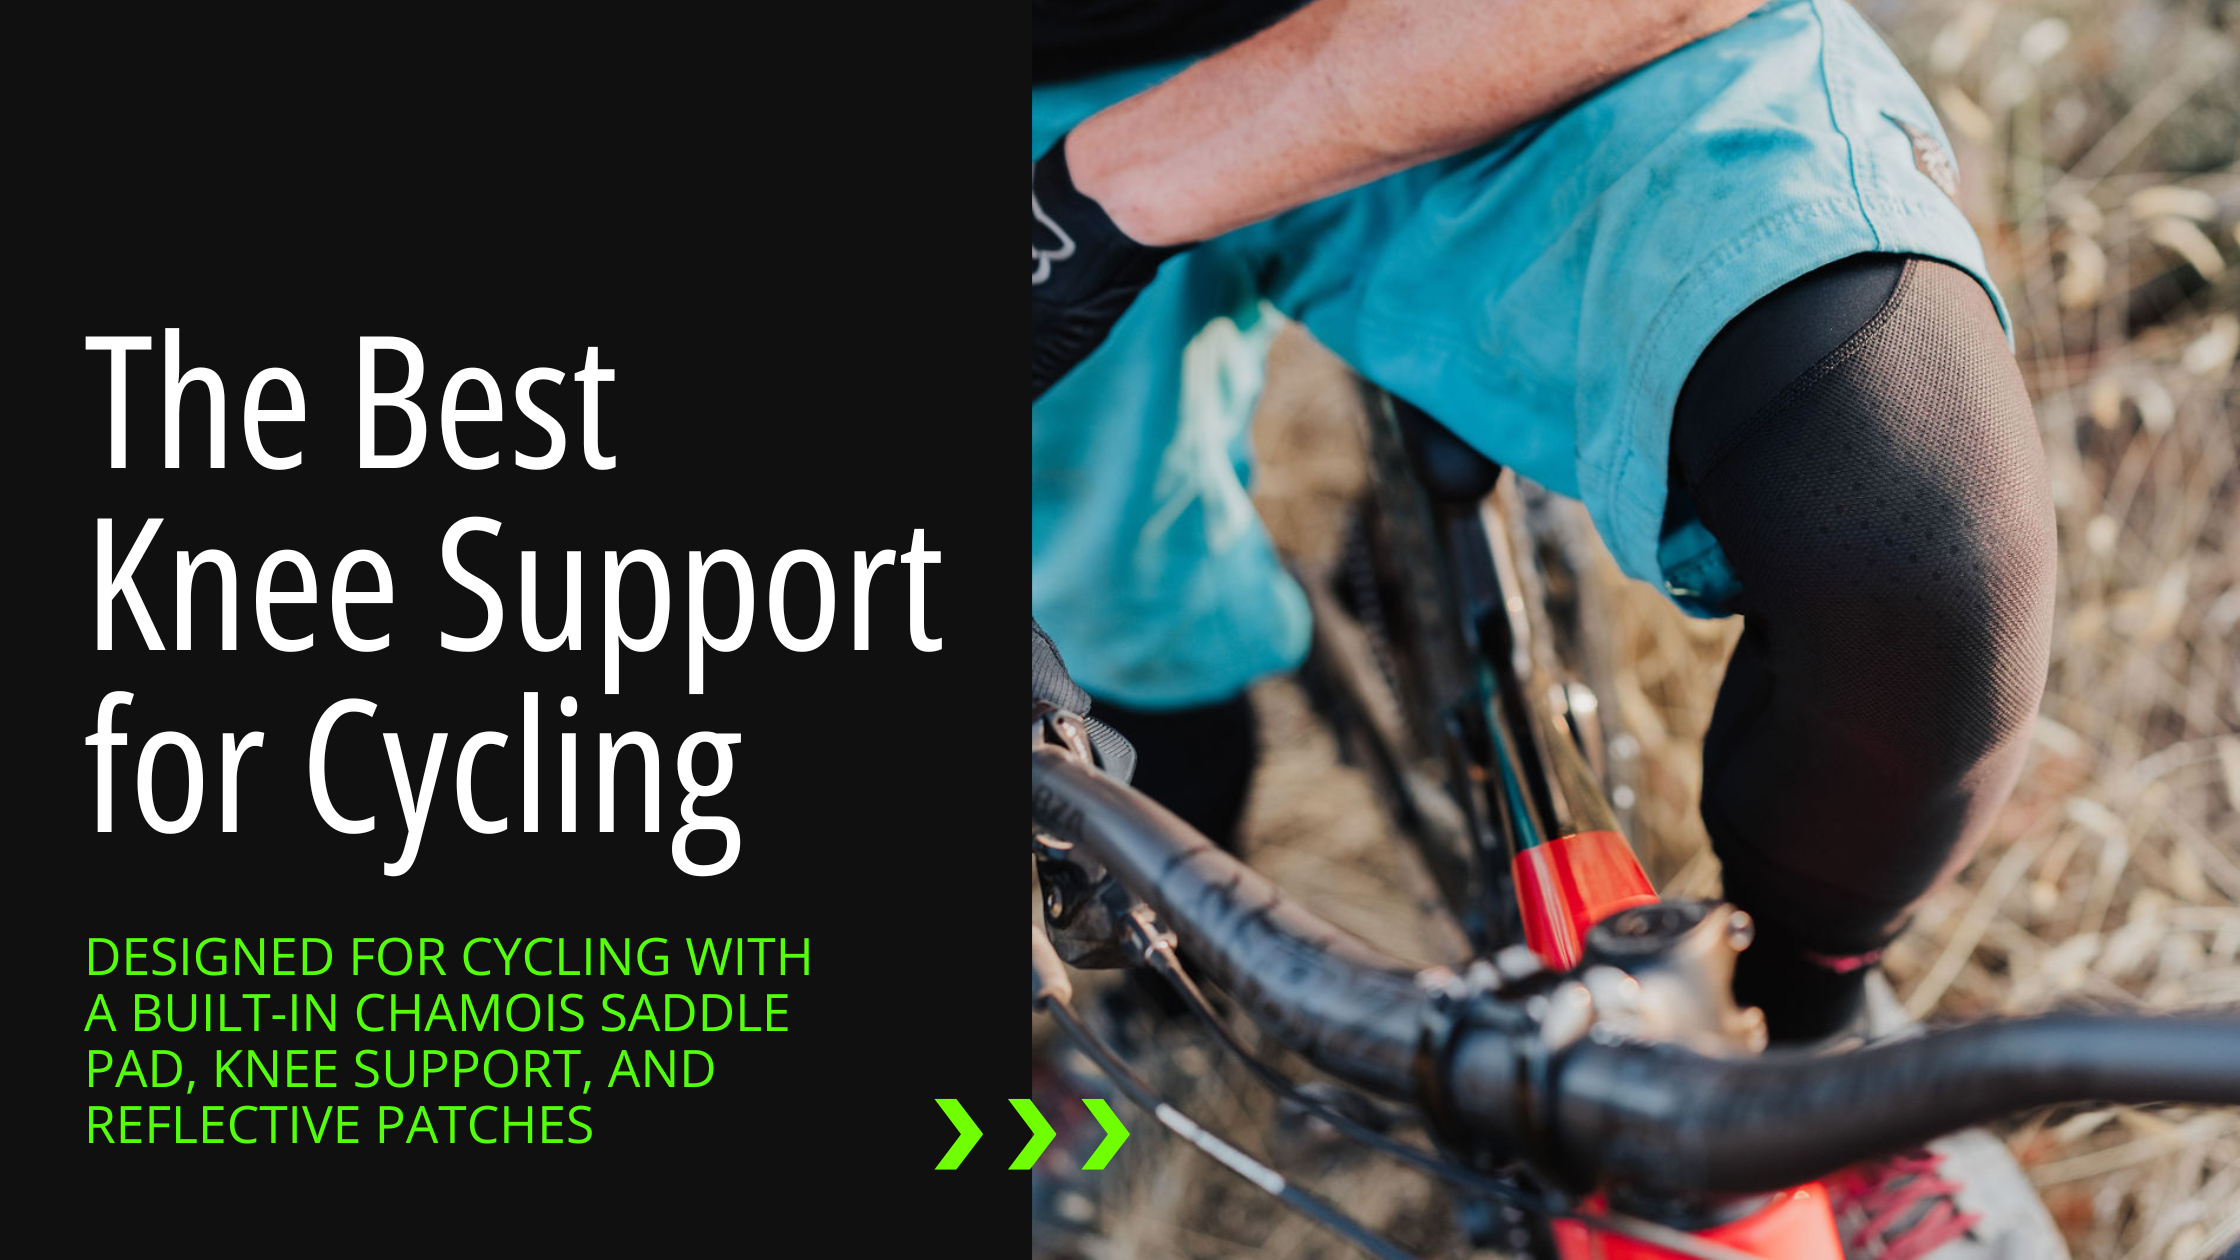 Blog header for The Best Compression Pants for Cycling, showing the title on the left and a persons knees on a bike from above. Knee brace for cycling, cycling knee support, knee support cycling, compression pants, compression leggings, compression pants 